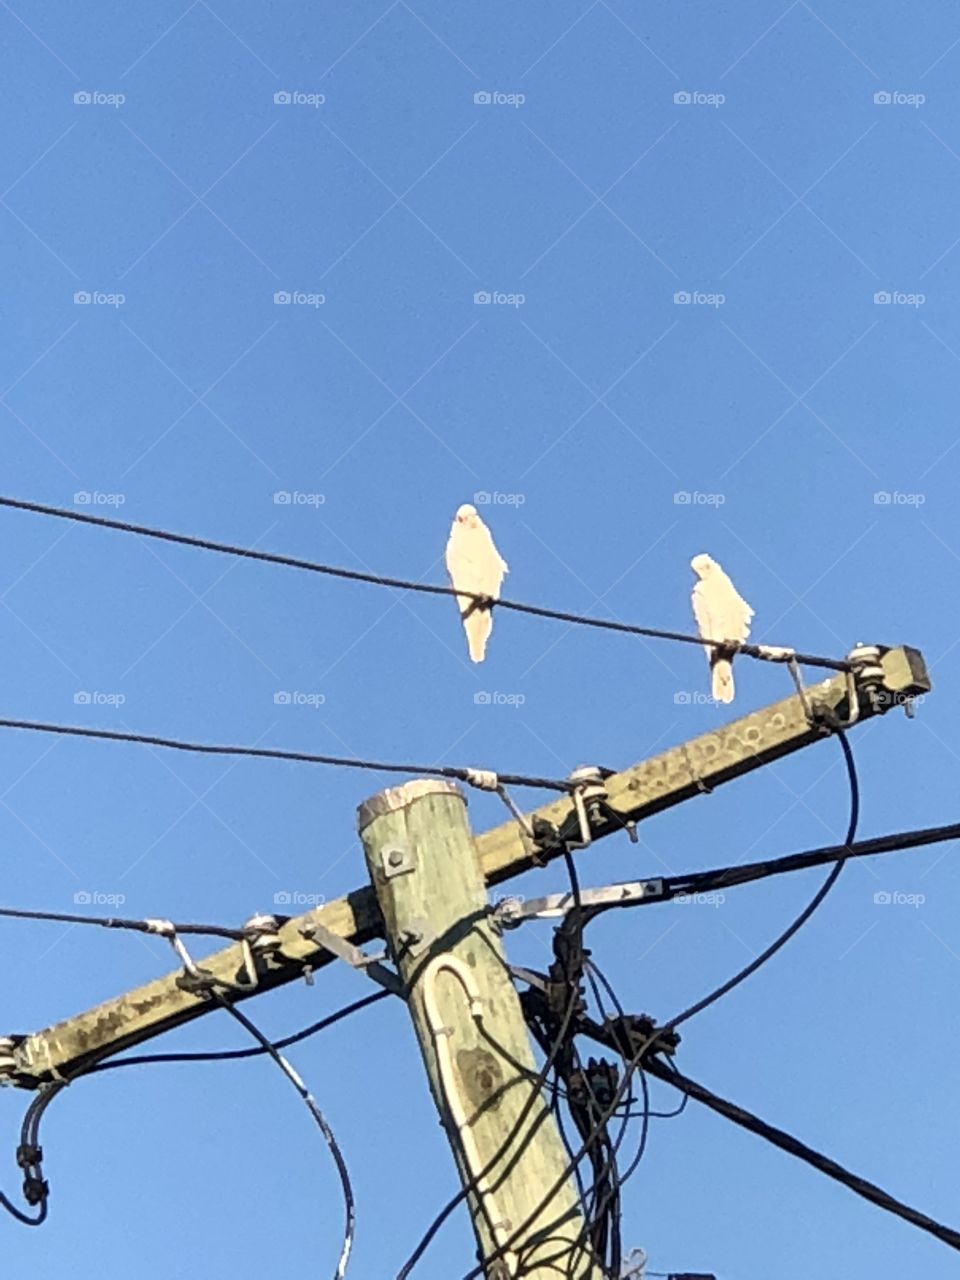 Parrots on electric wire